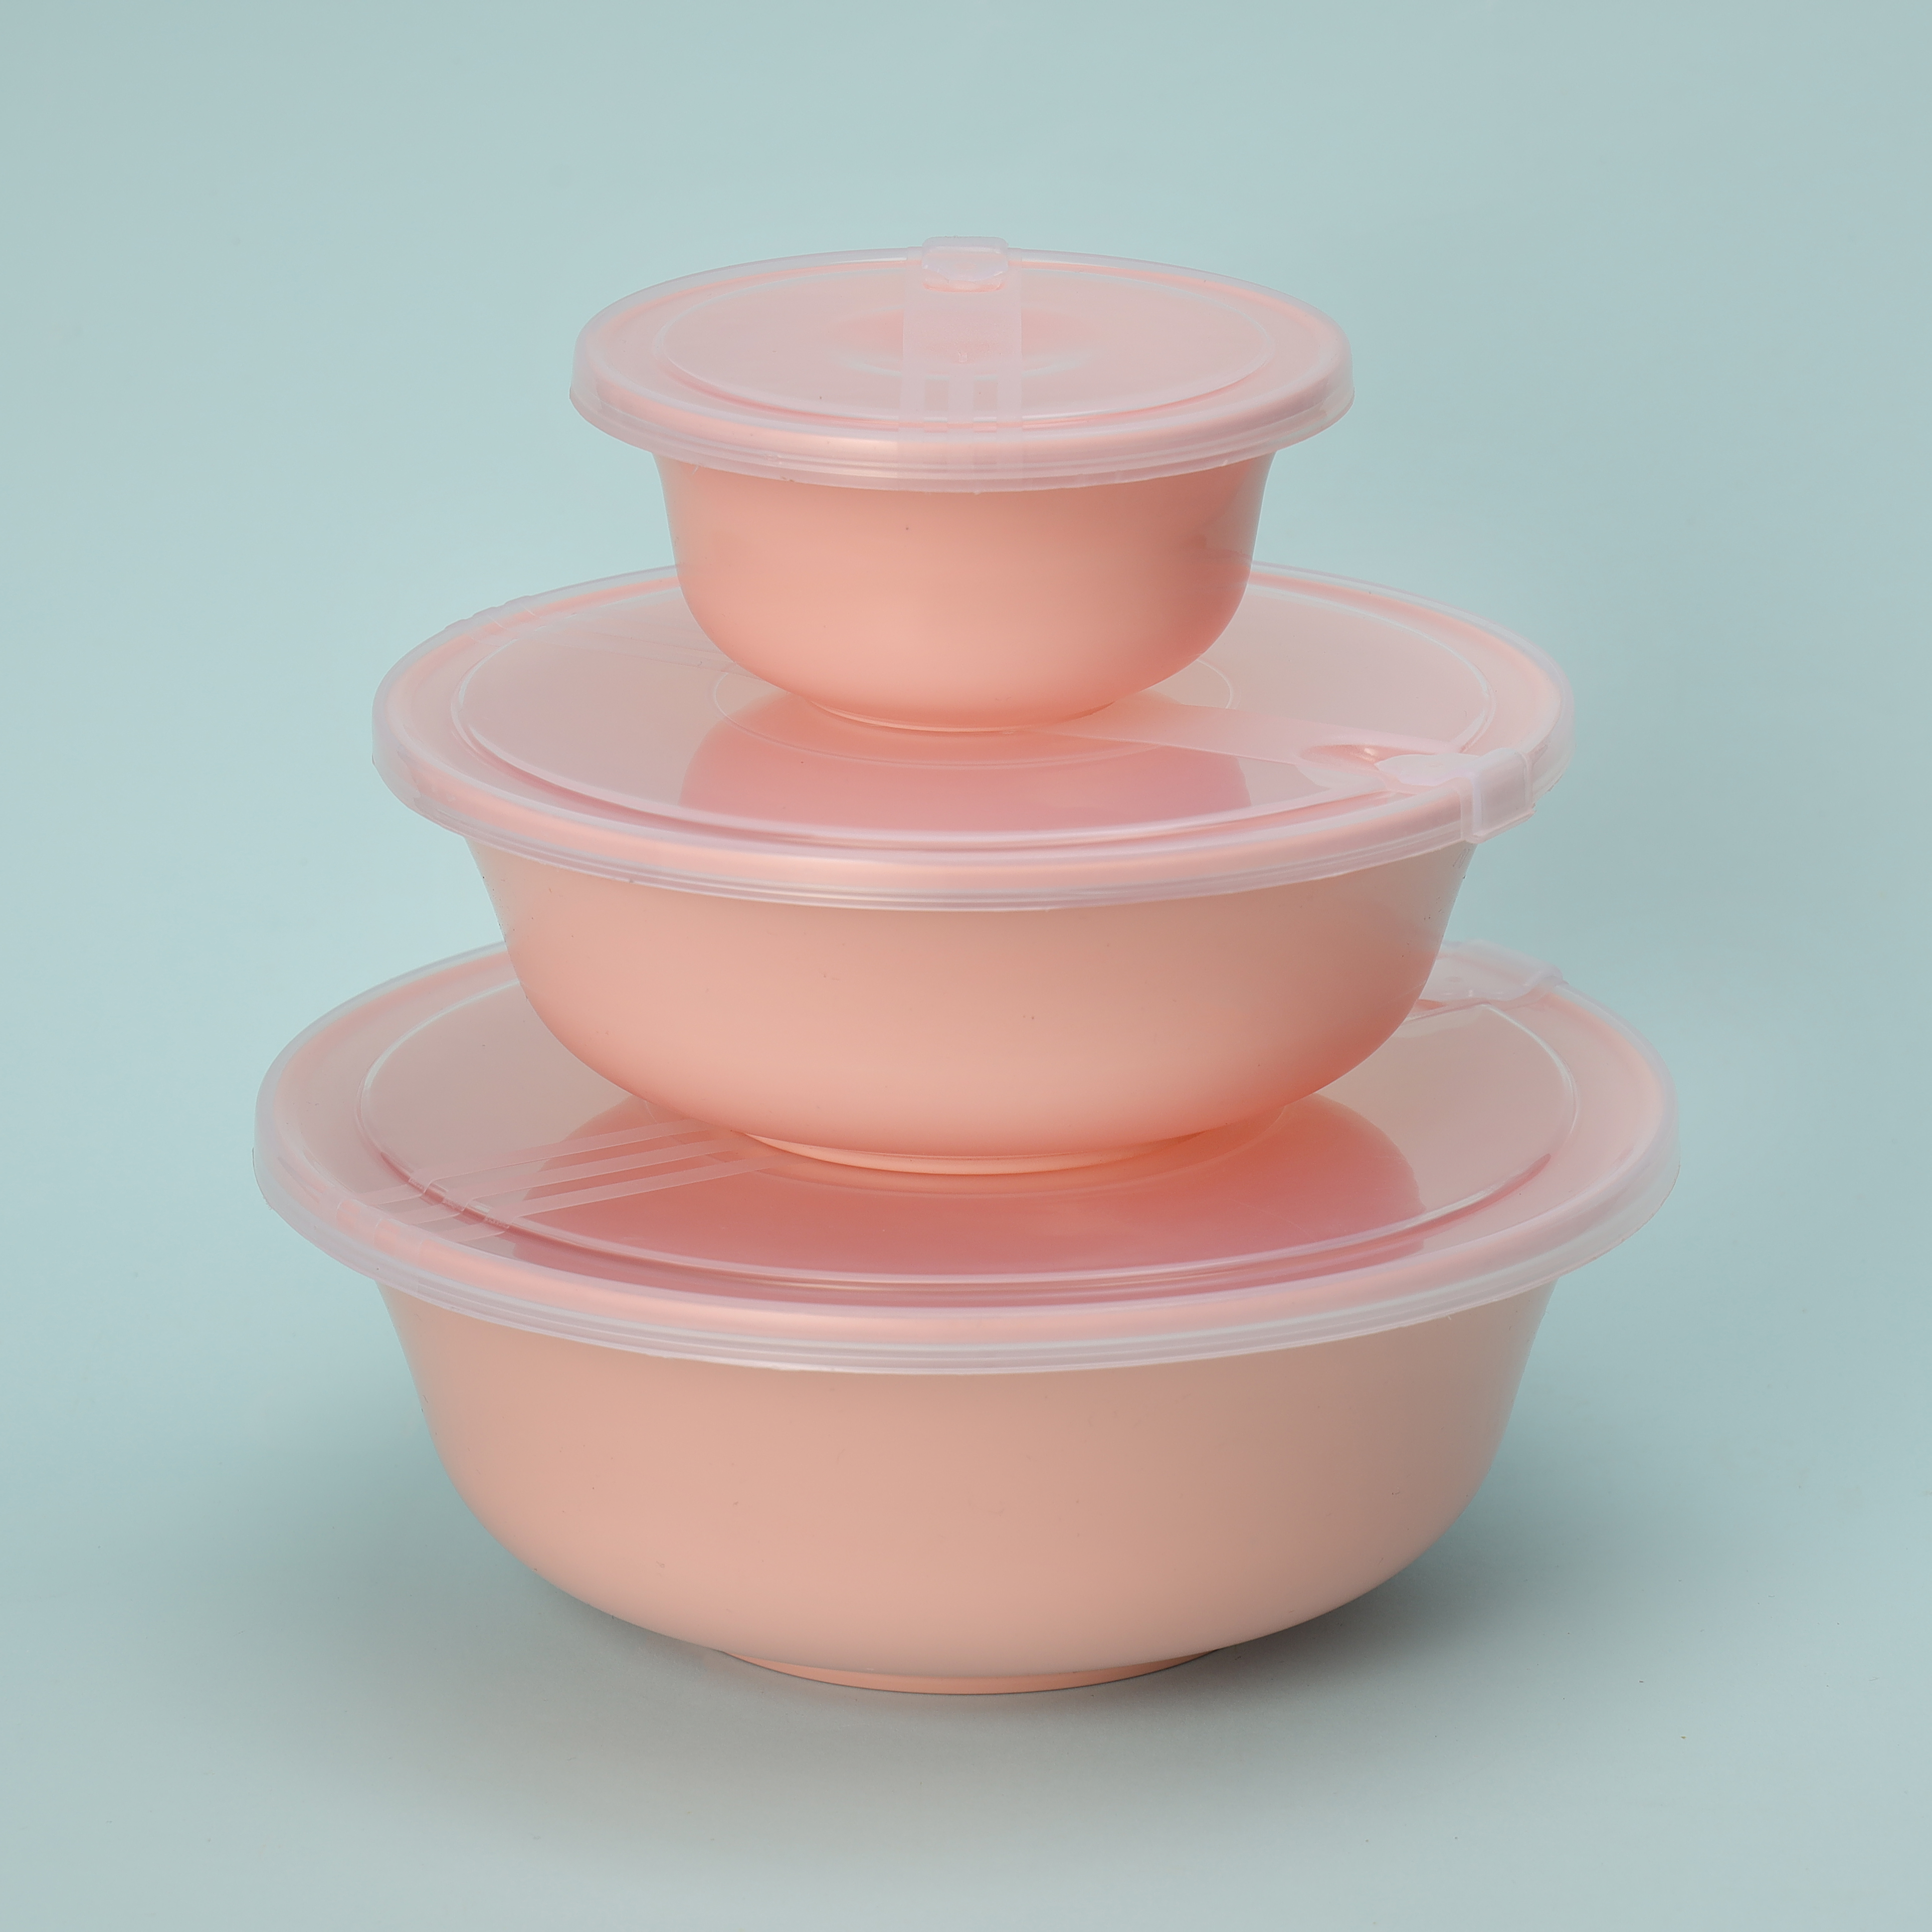 3pcs Bowl Set with Air-Tight Lid, Food Container, RF11007, Classic Prep  Bowls with Lids, Food Storage Container